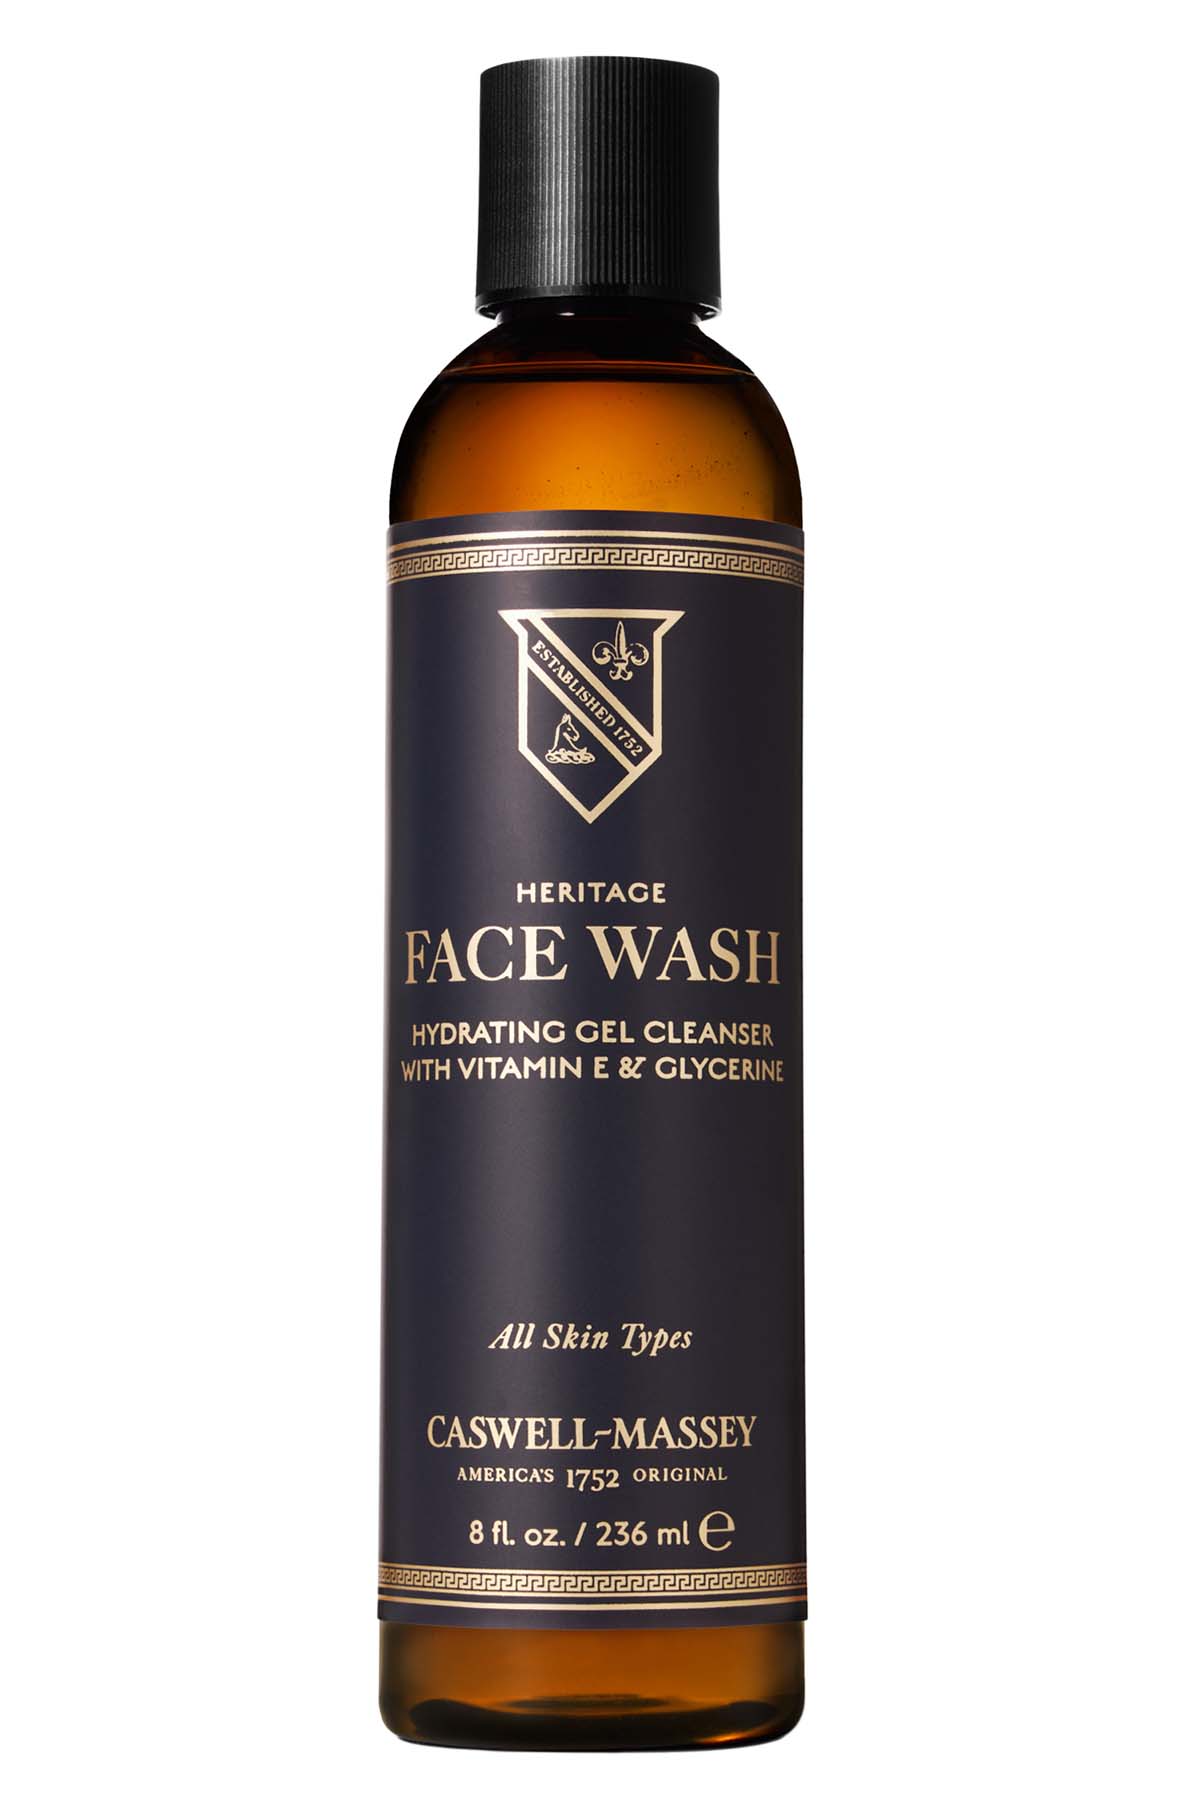 Caswell Massey Face Wash Gel Cleanser